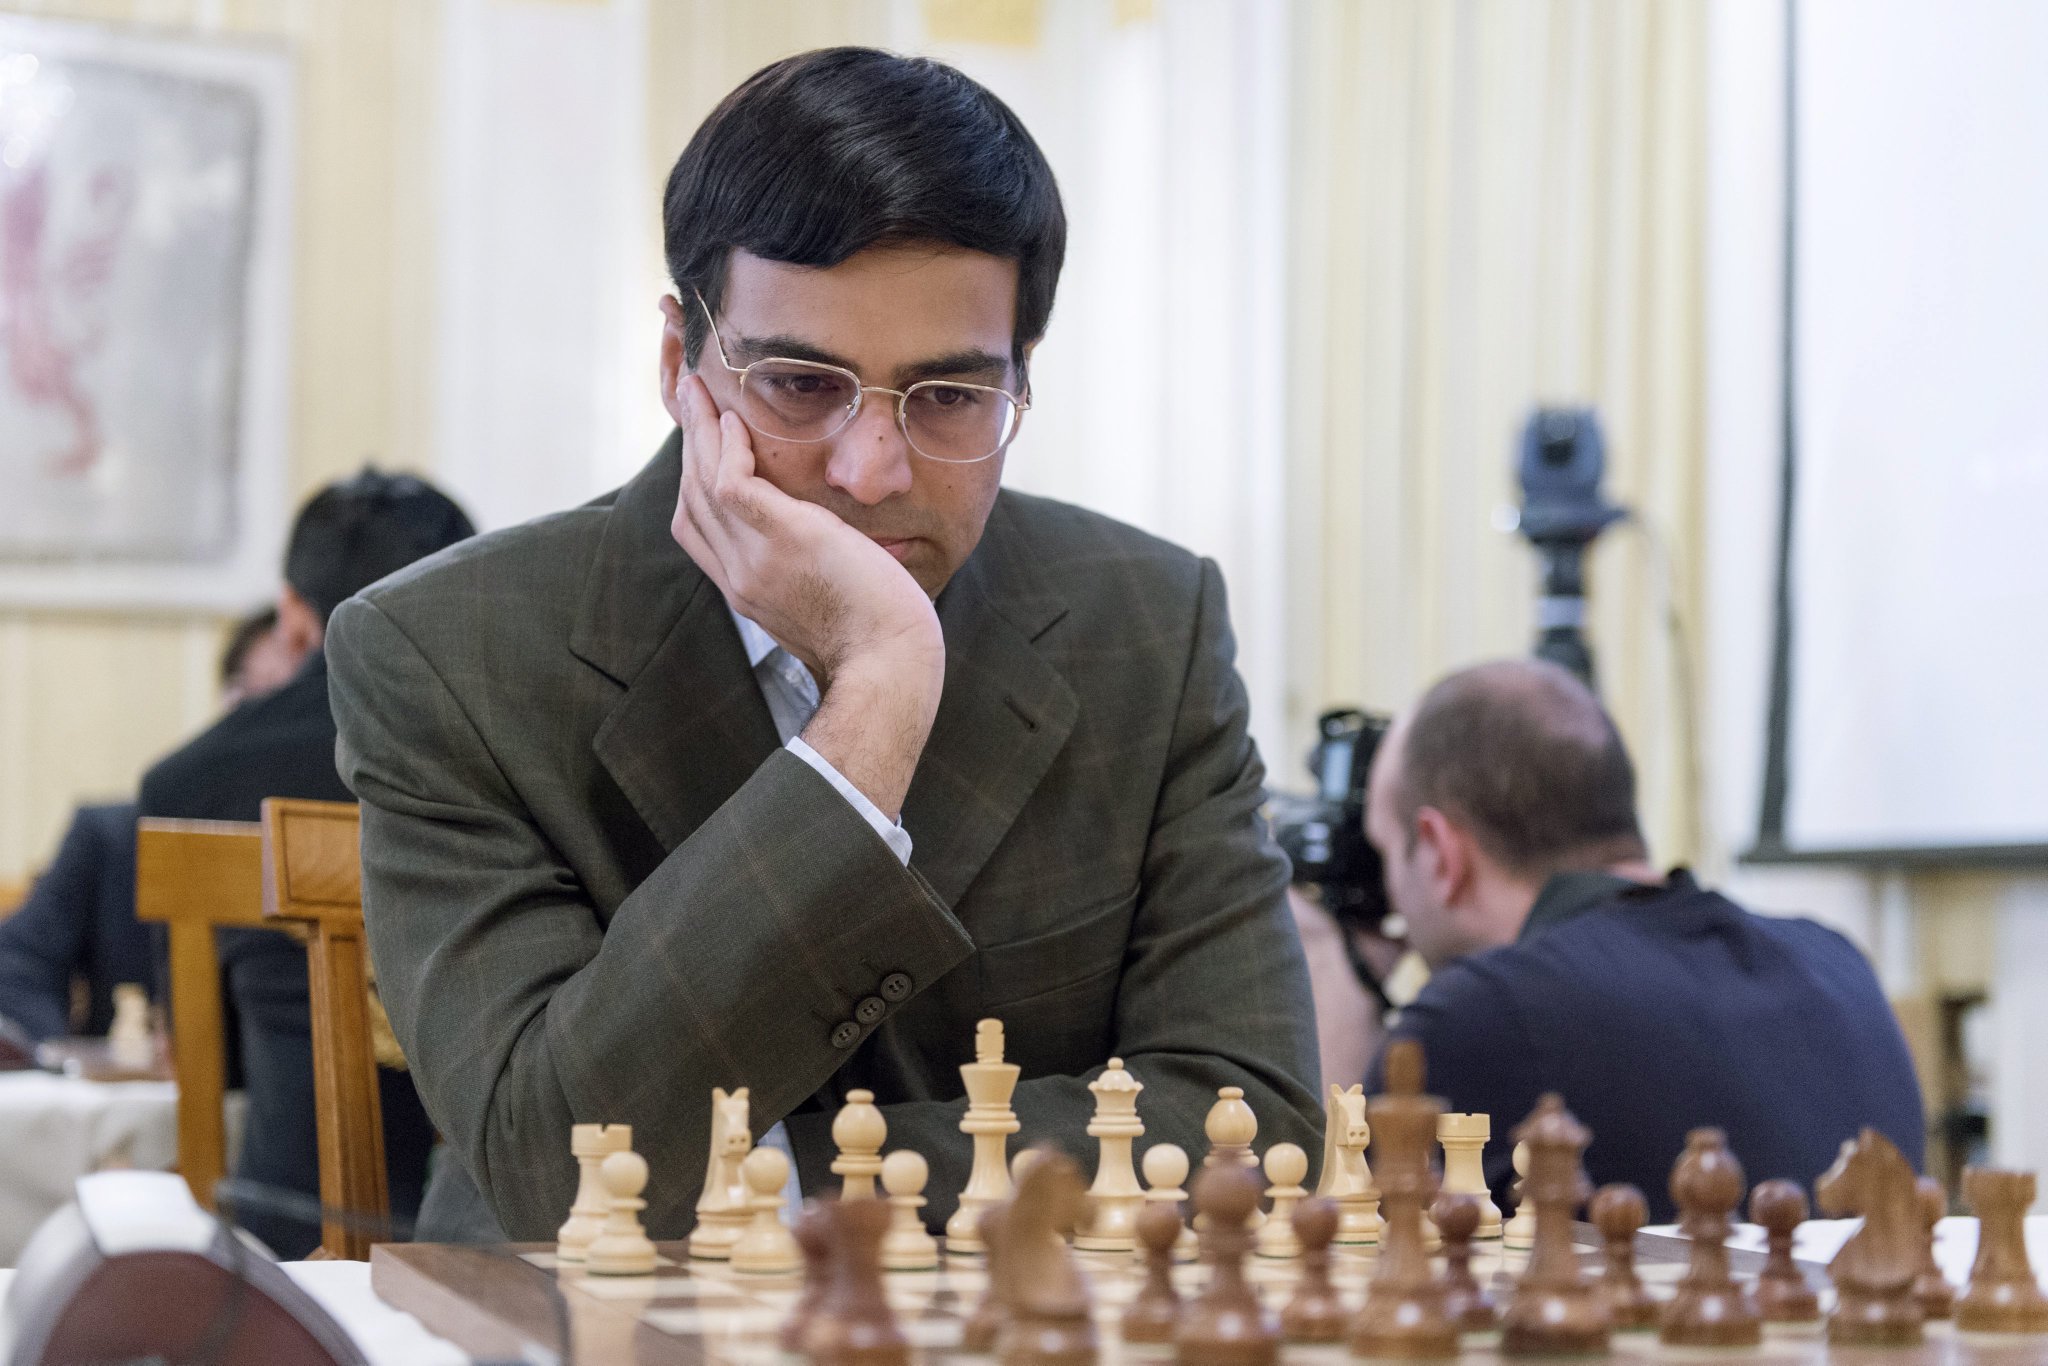  Happy birthday to one of the greatest chess players of all time

 